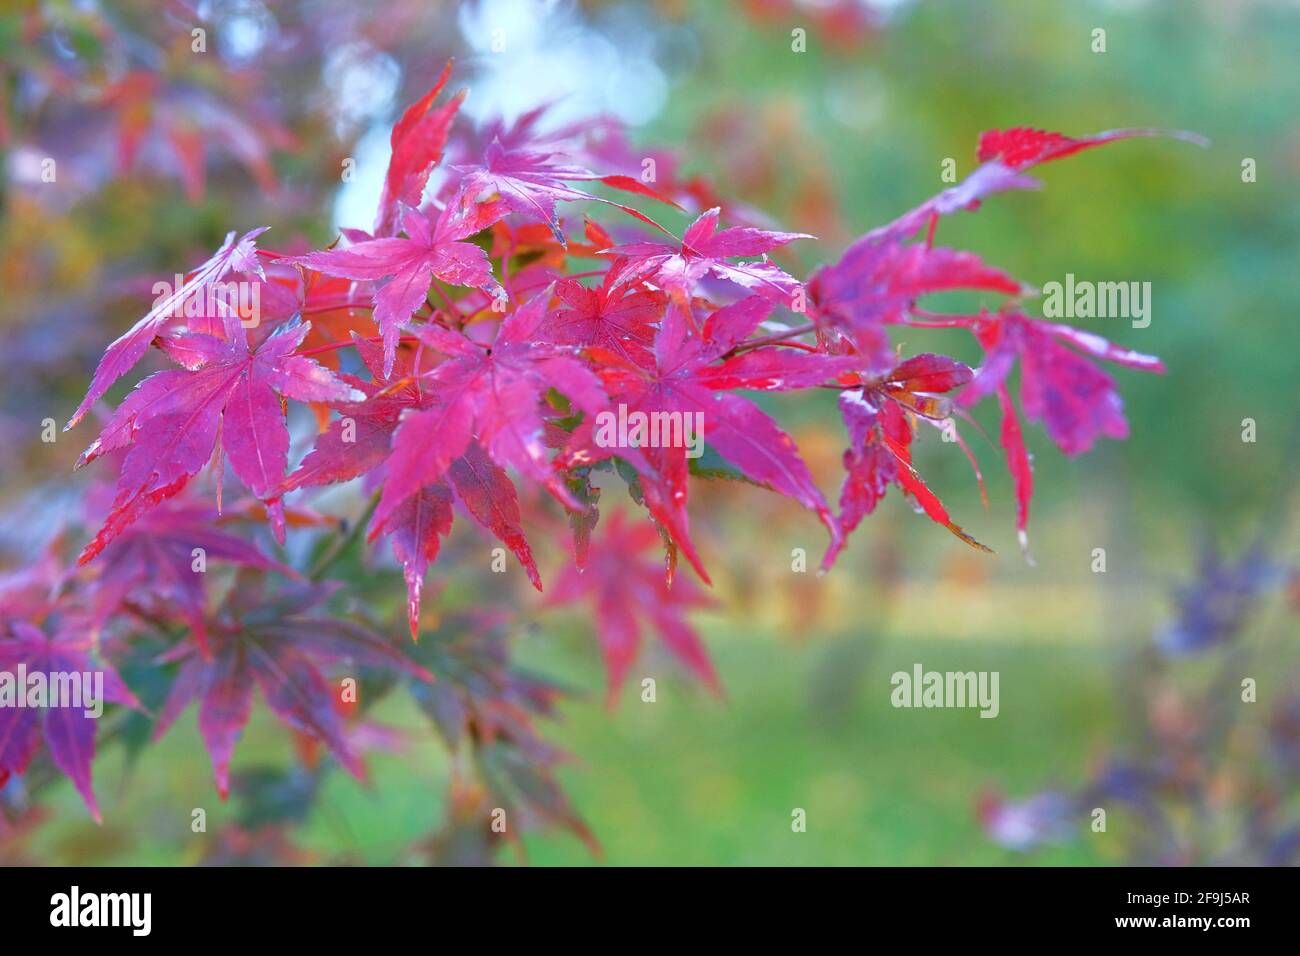 Red maple leaves on blurred background, Bright autumn concept. Rainy weather. Stock Photo